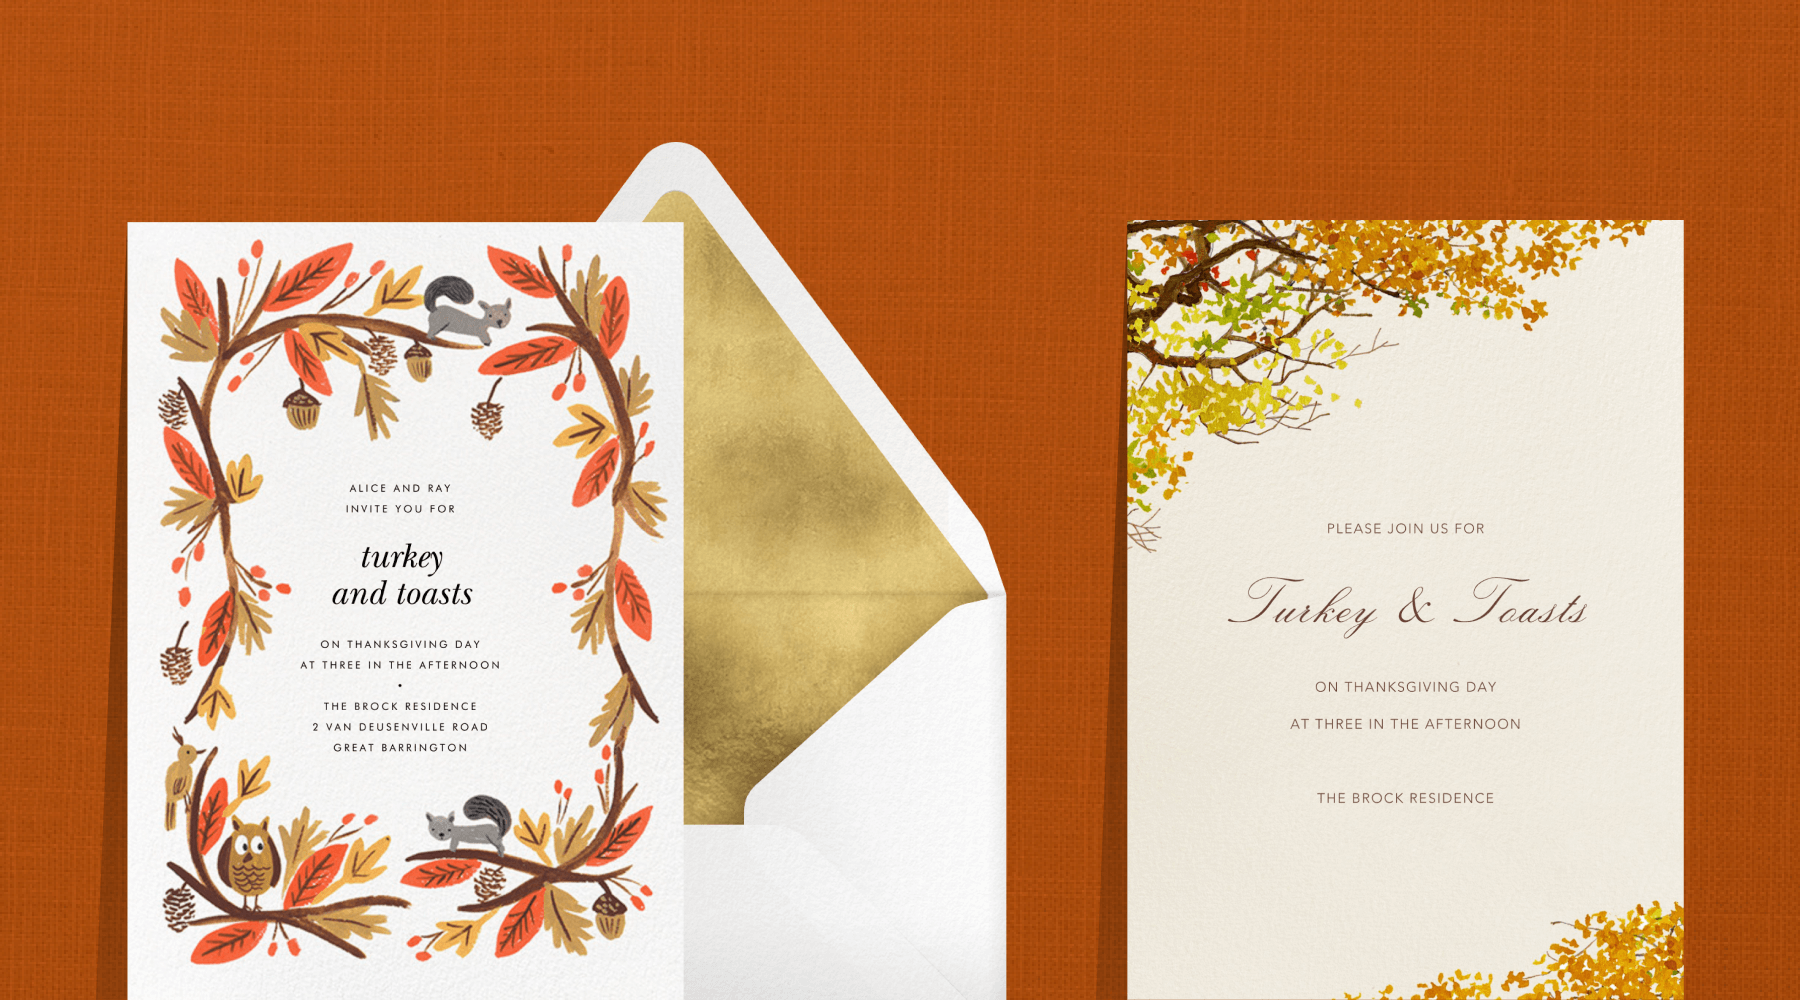 Two invitations for “turkey and toasts” on an orange background. Left has a retro border of simplified branches with autumn leaves and squirrels and an owl. Right has delicate watercolor autumnal branches in the top left and lower right corners.